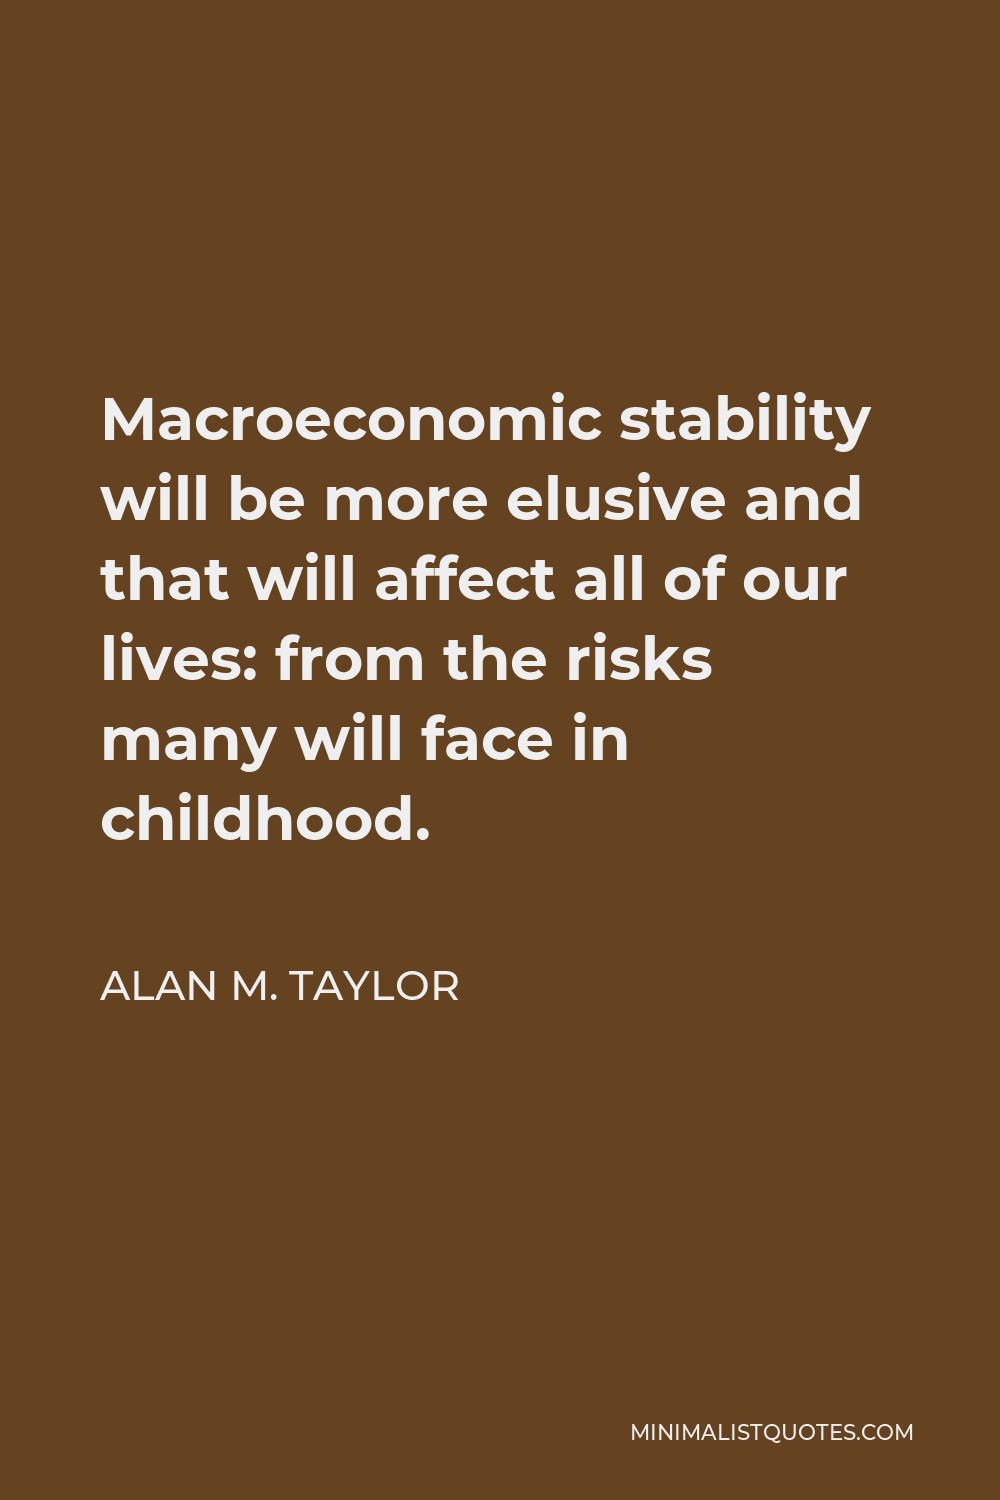 Alan M. Taylor Quote - Macroeconomic stability will be more elusive and that will affect all of our lives: from the risks many will face in childhood.